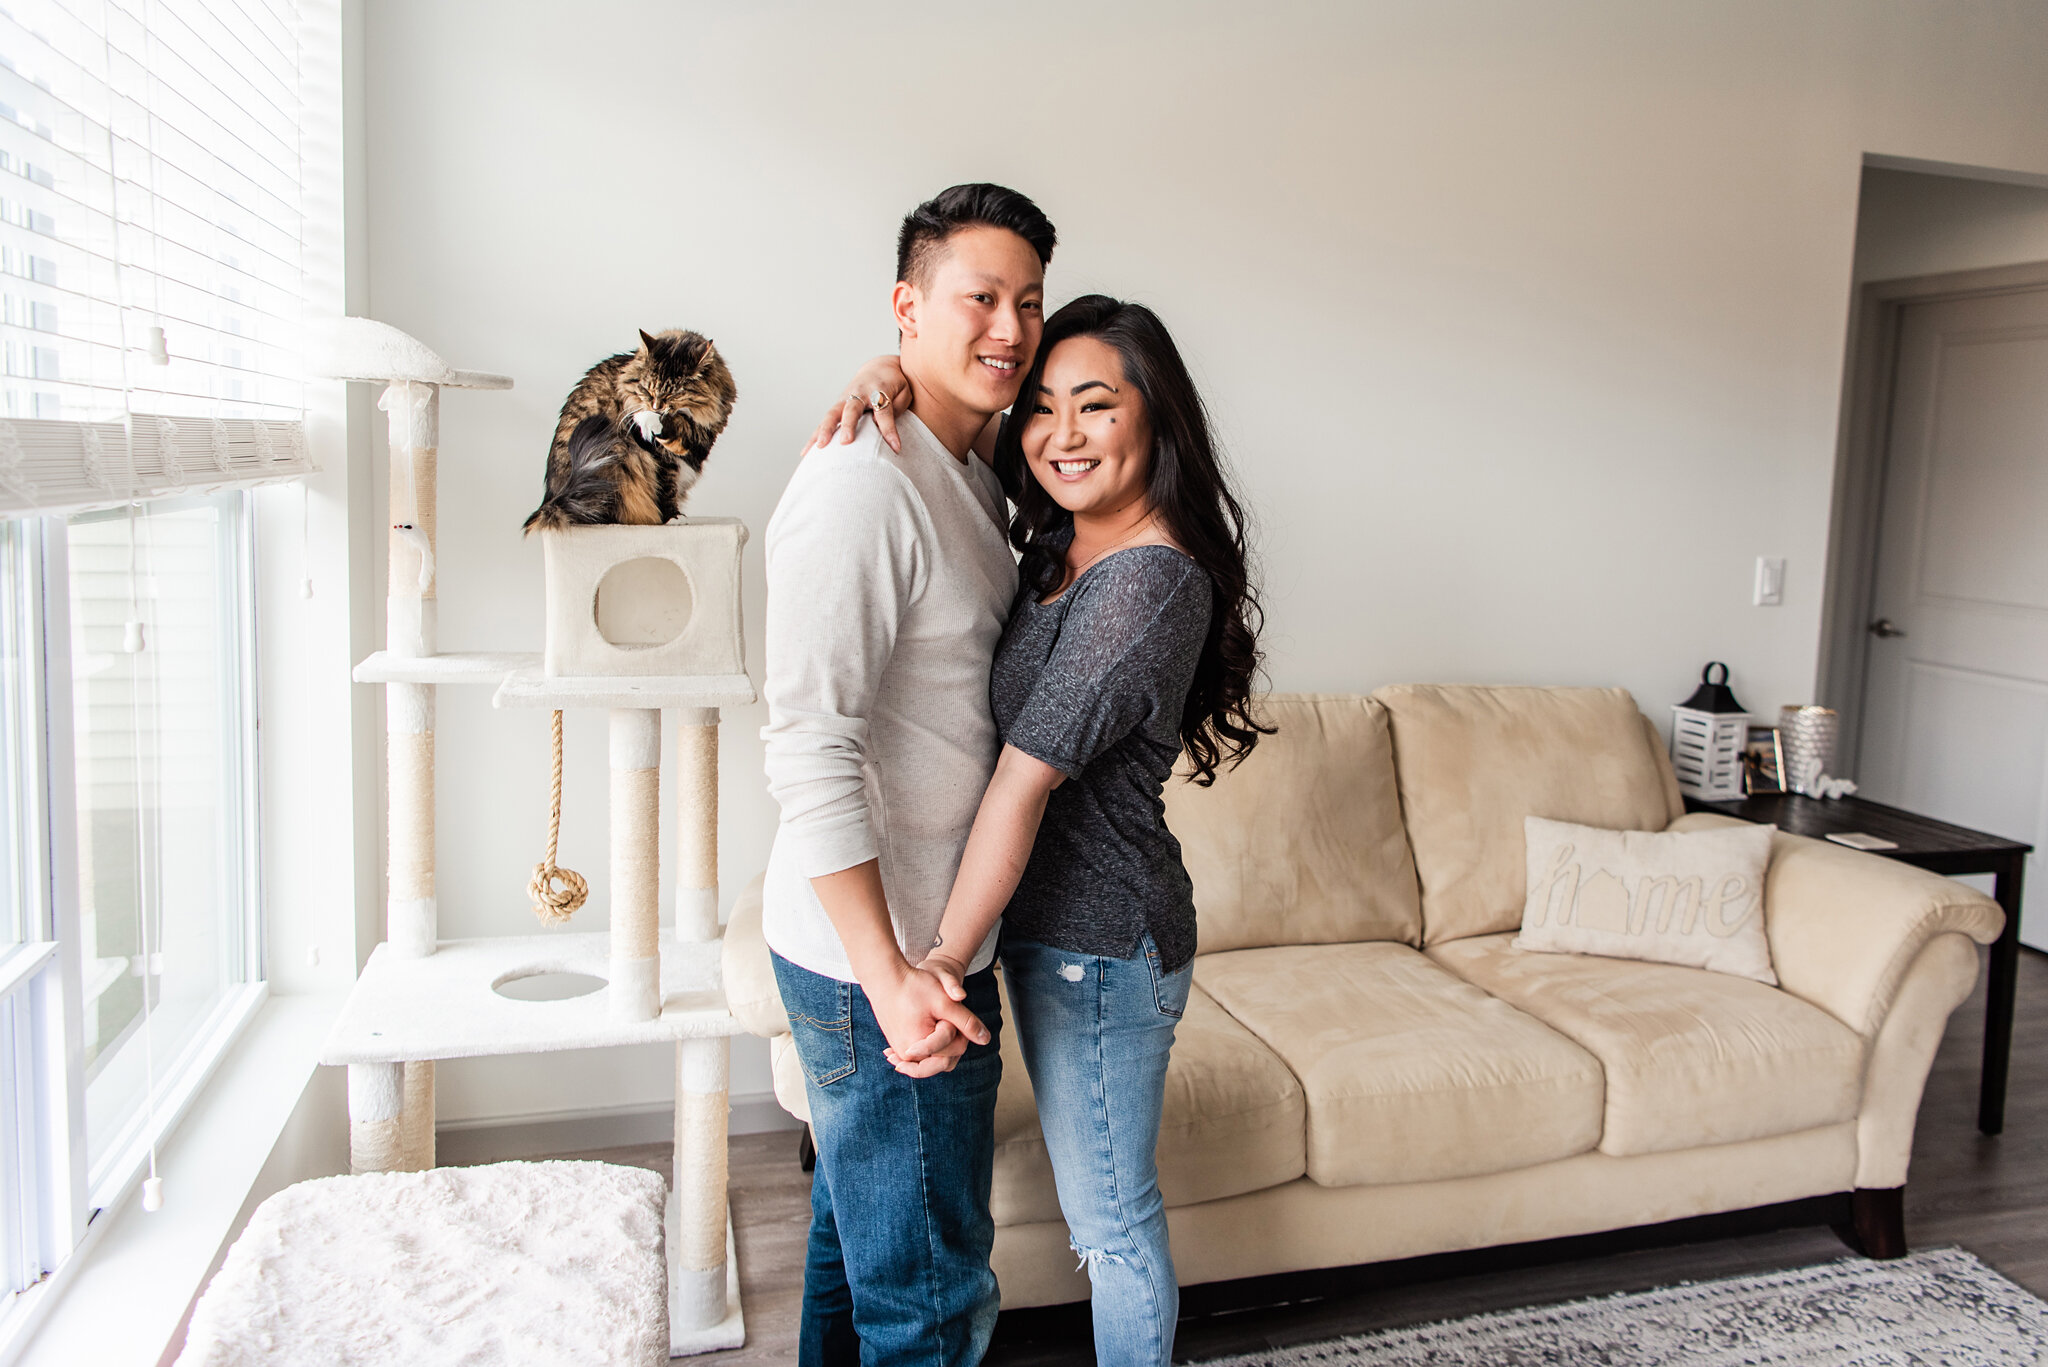 In_Home_Rochester_Couples_Session_JILL_STUDIO_Rochester_NY_Photographer_4146.jpg